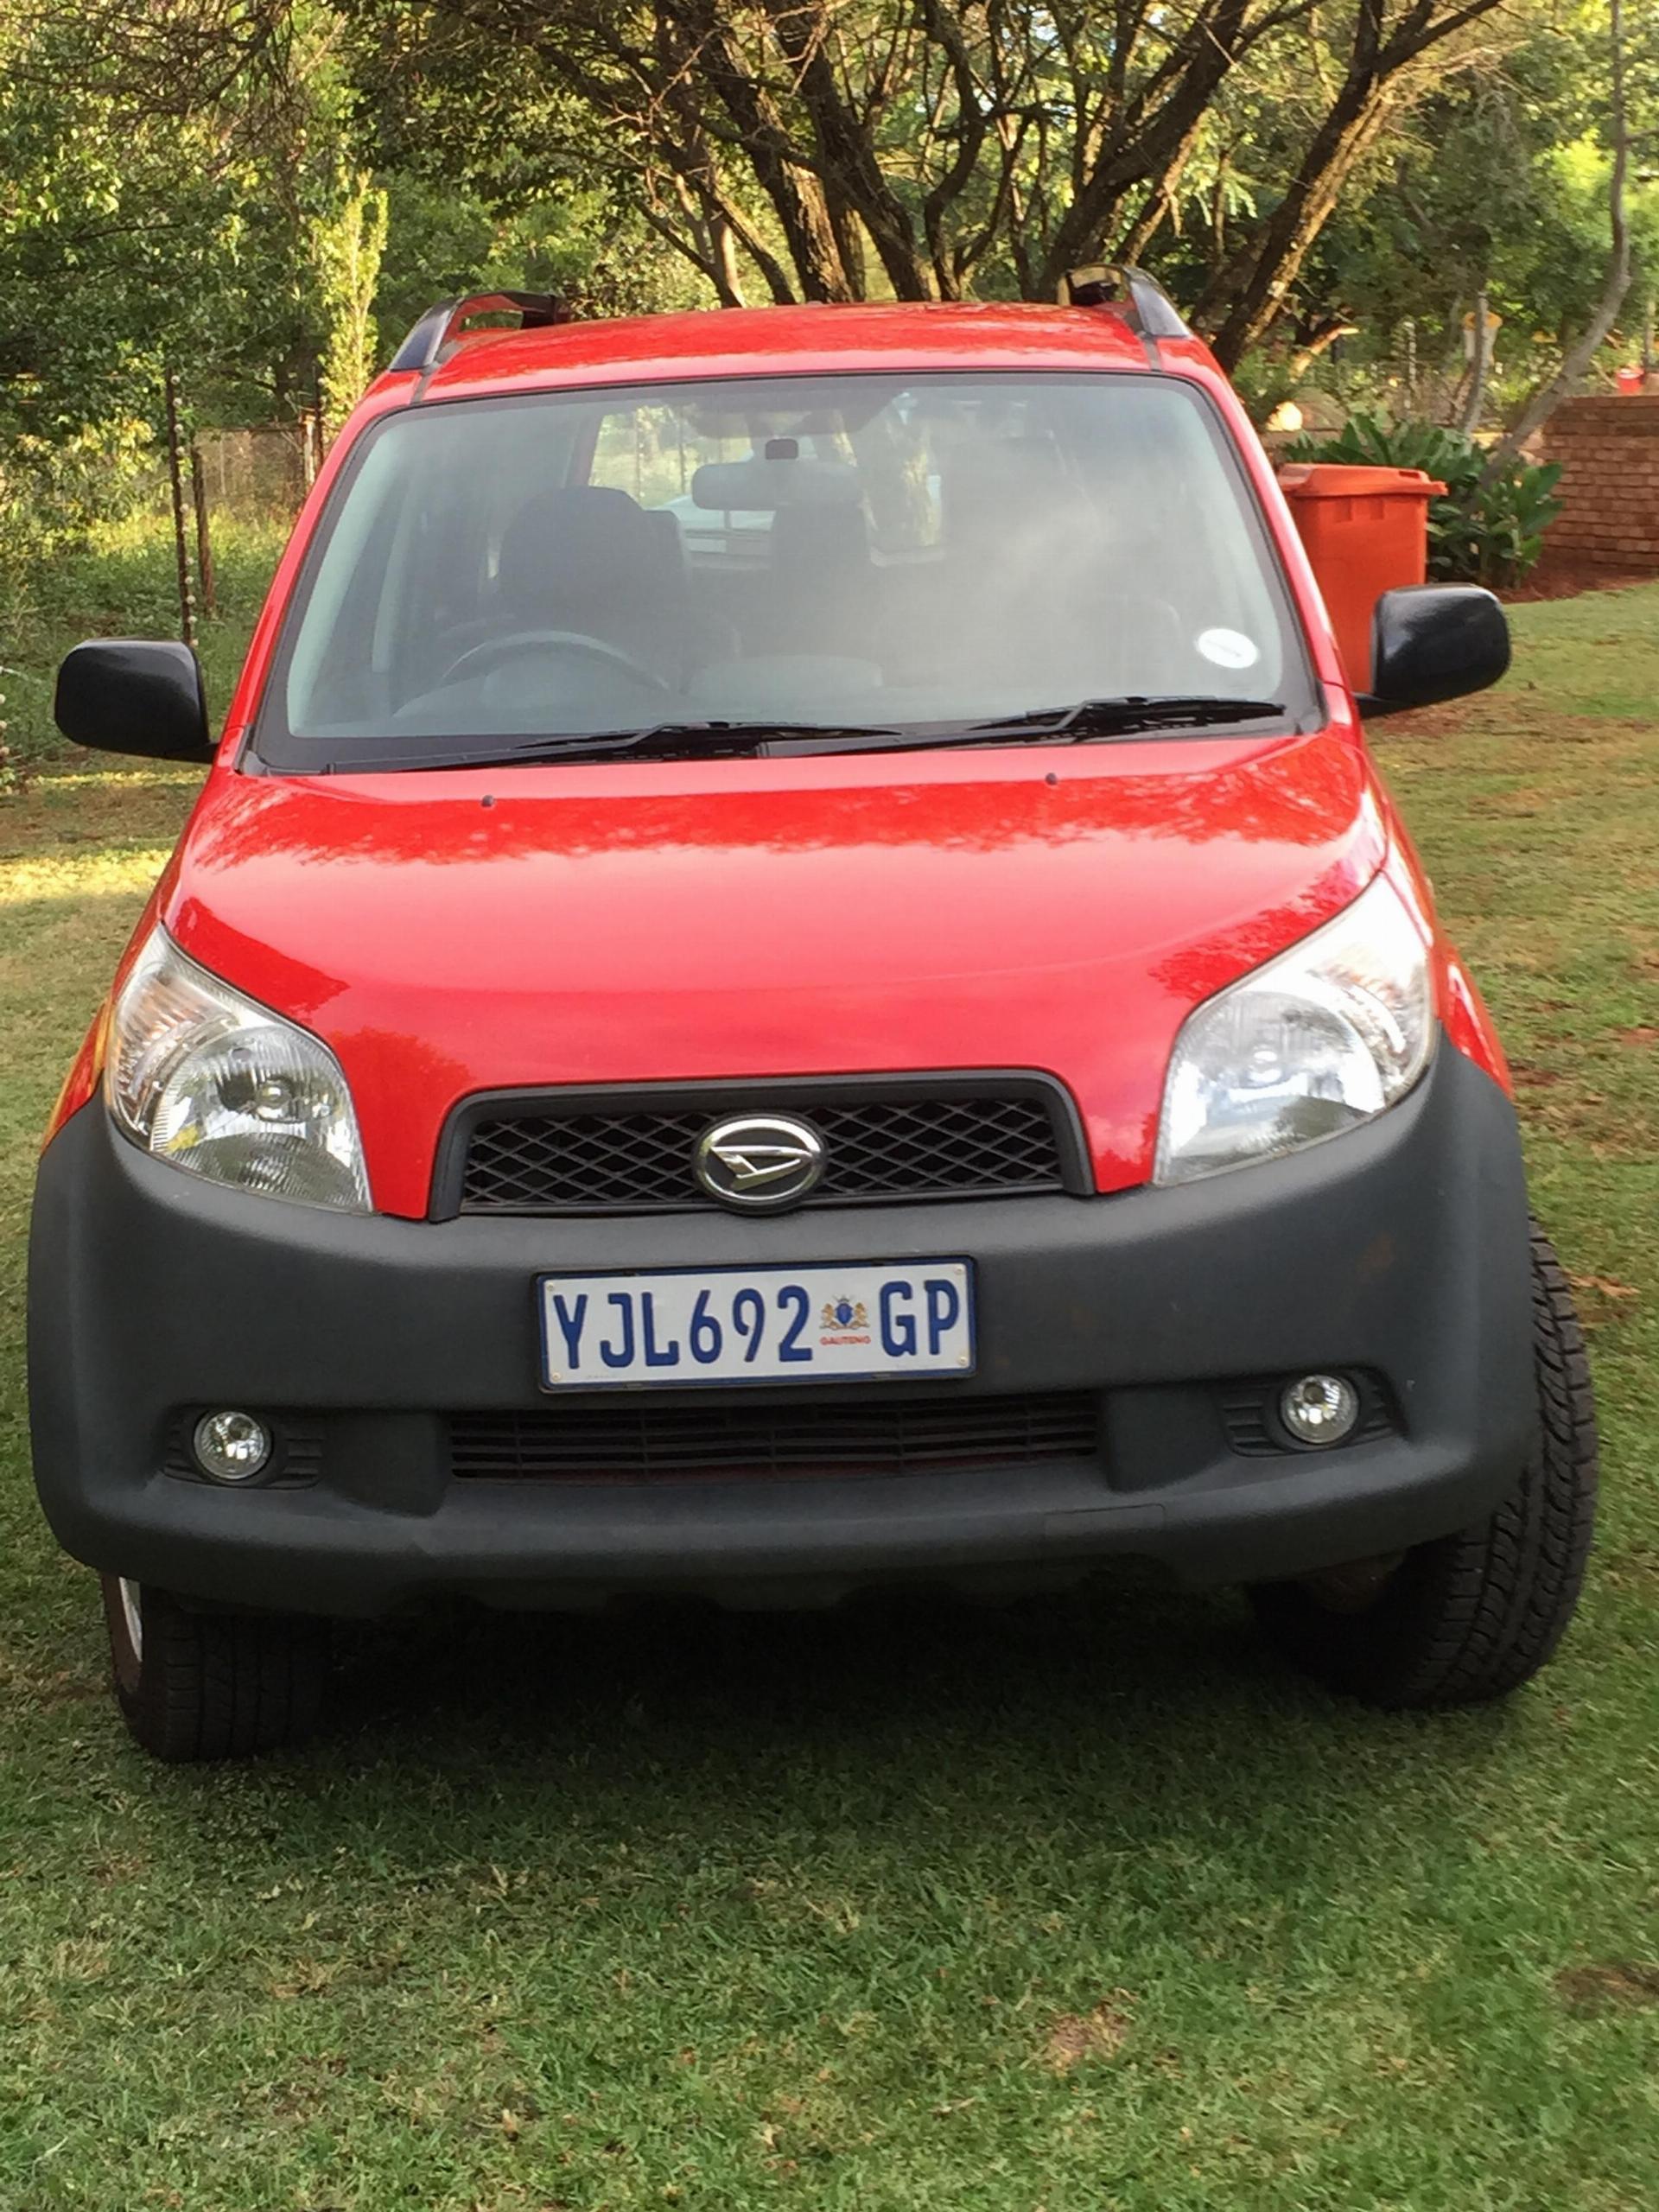 Daihatsu Red Terios For Sale What AN Awesome DRIVE!